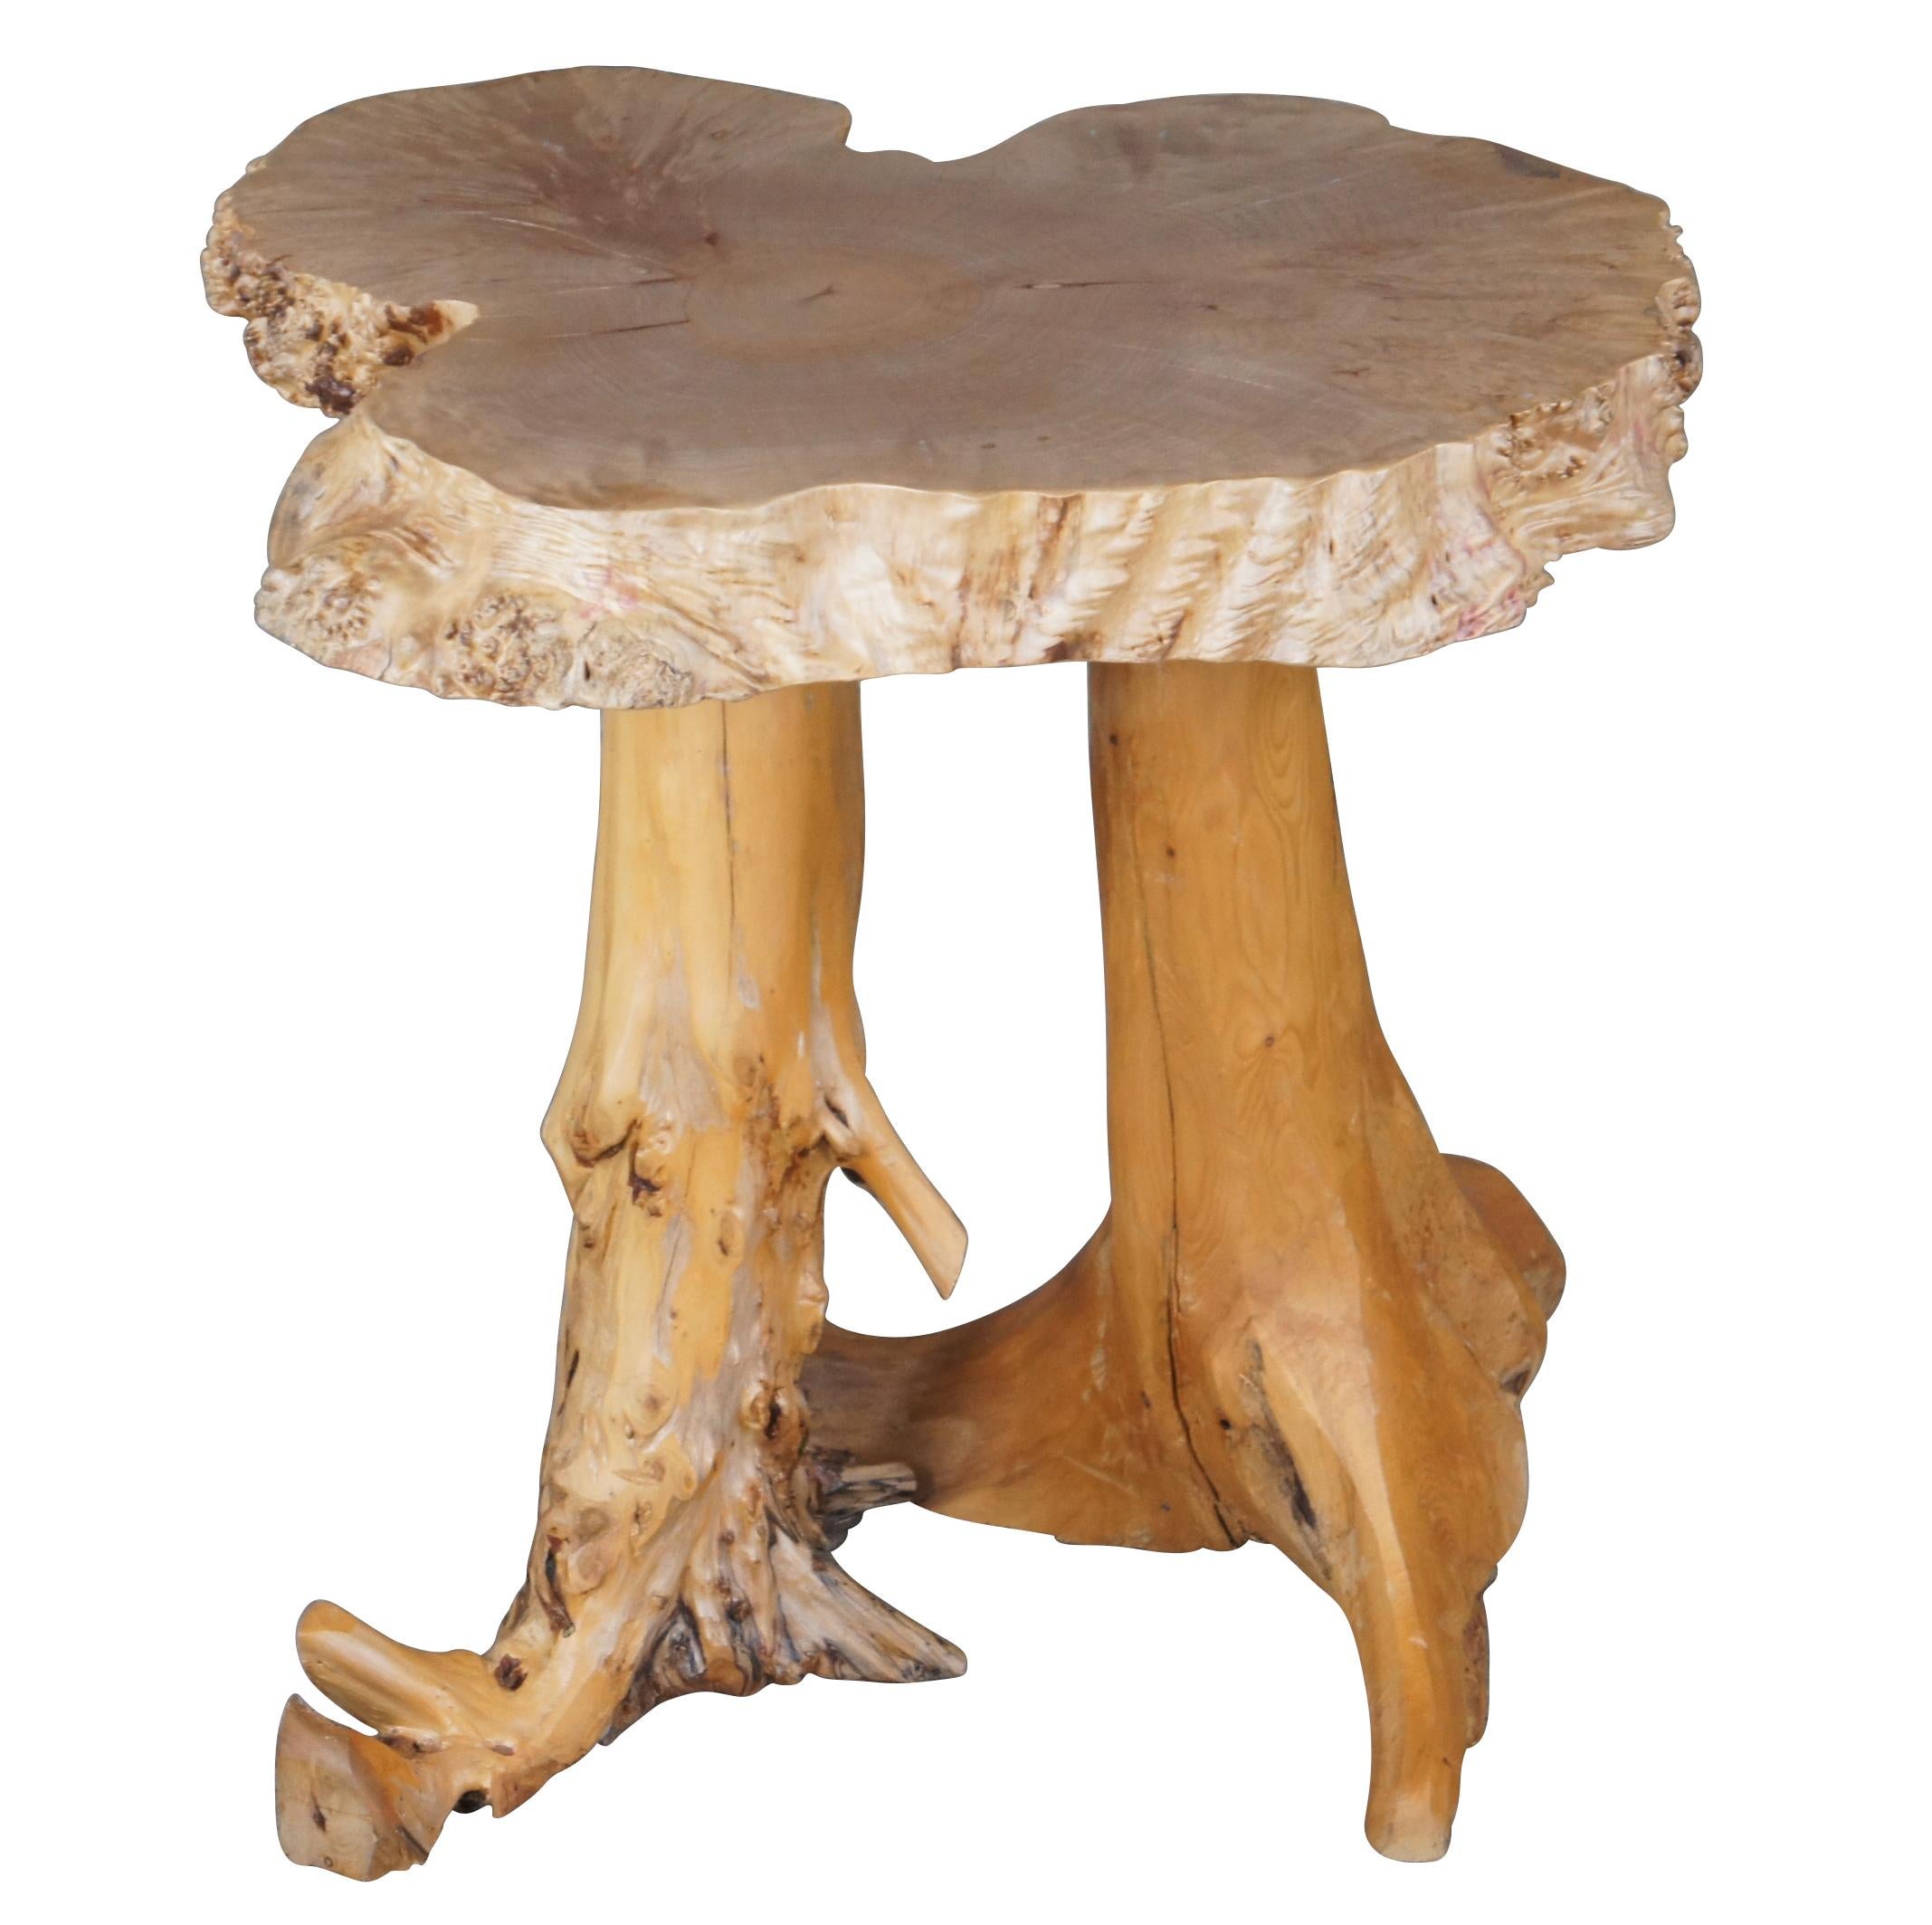 Rustic Farmhouse Maple Burl Live Edge Lodge Slab Side Table Branch Base In Good Condition For Sale In Dayton, OH